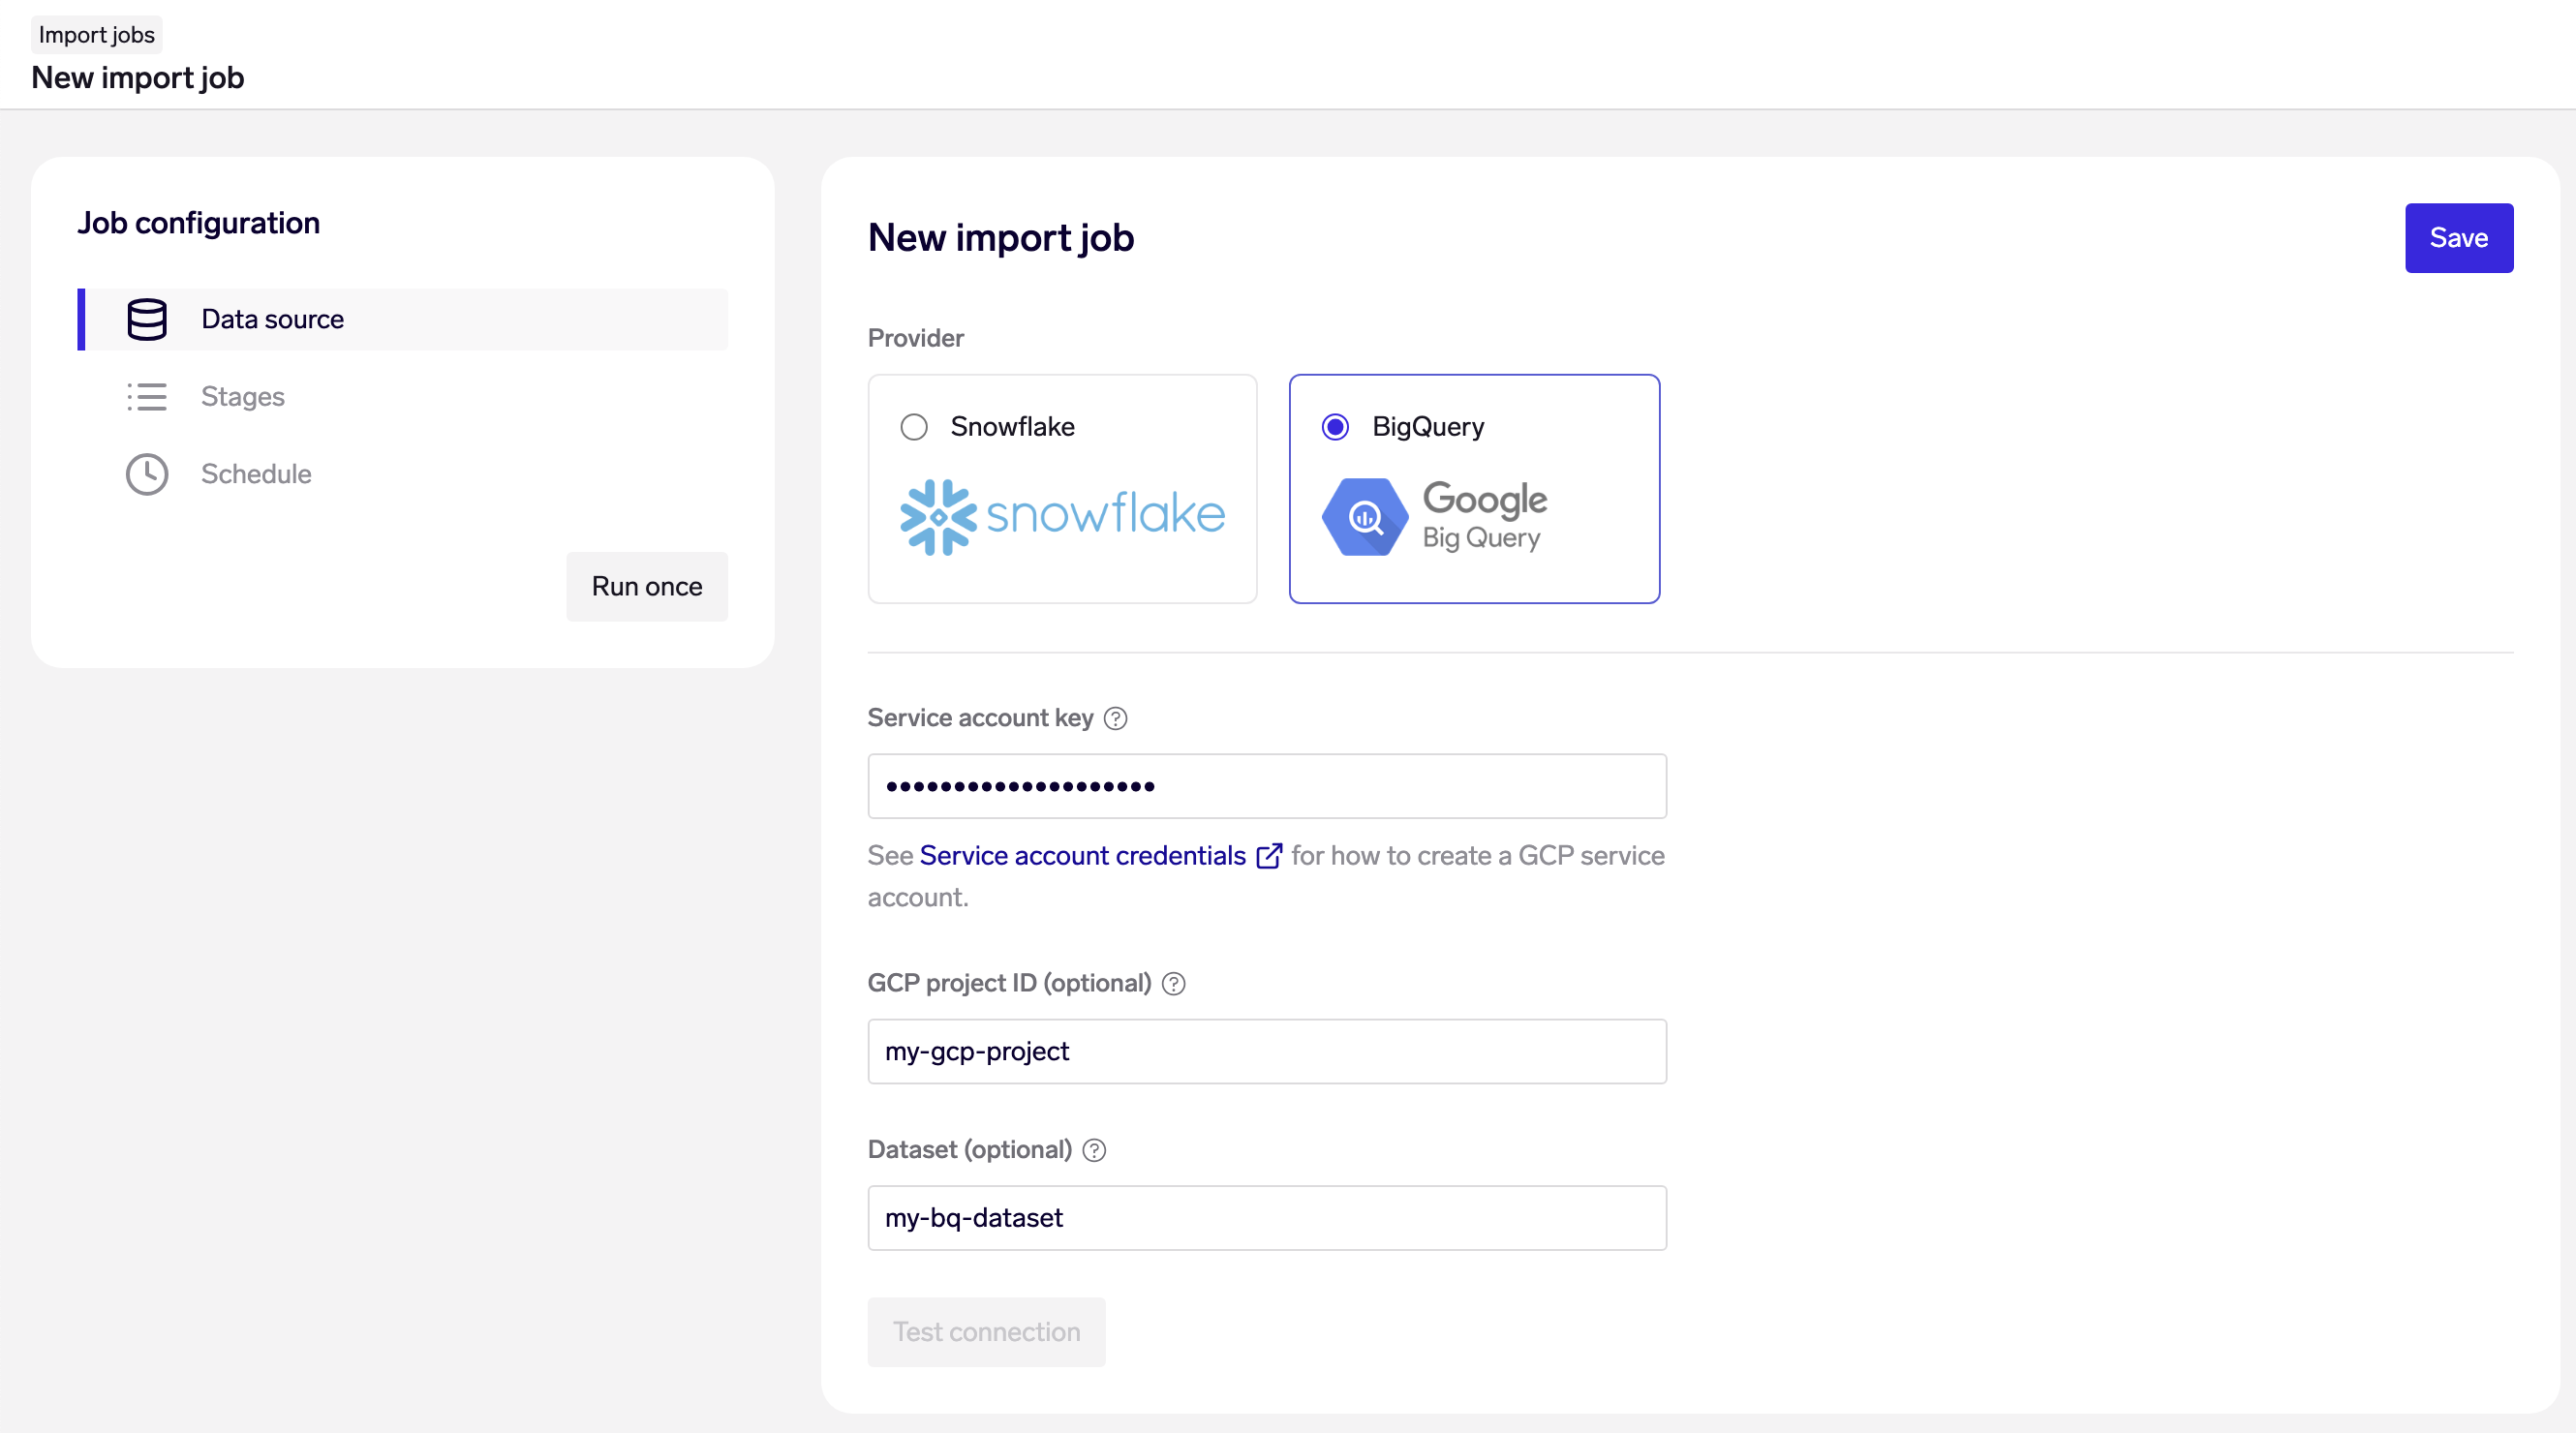 Setting up an Import Job with Google Cloud Platform service account with BigQuery access